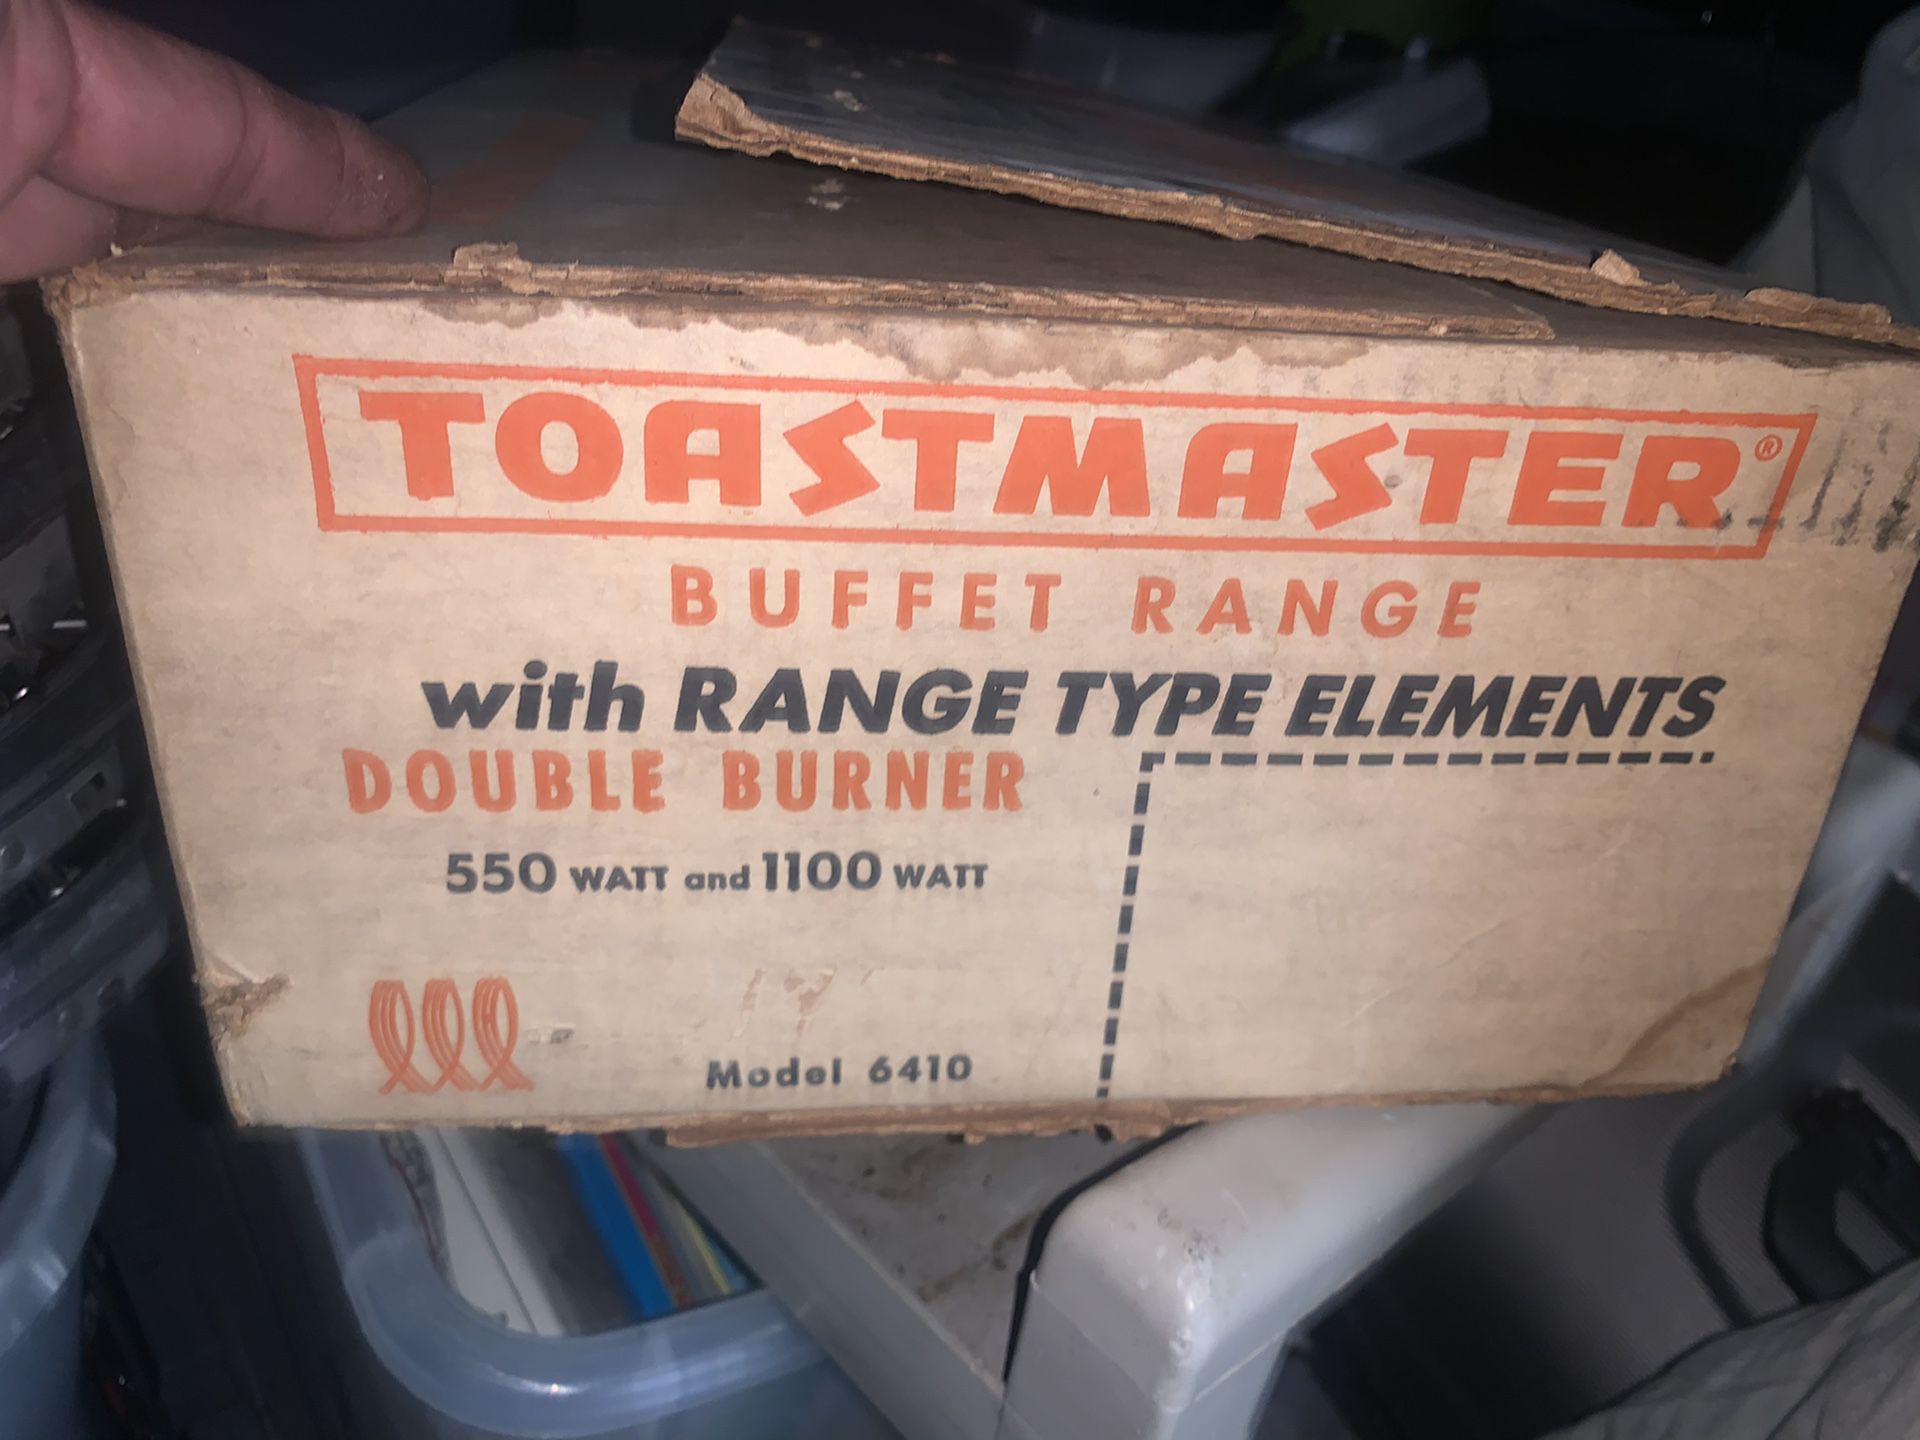 Portable Stovetop - Toastmaster 6400 for Sale in Portland, OR - OfferUp